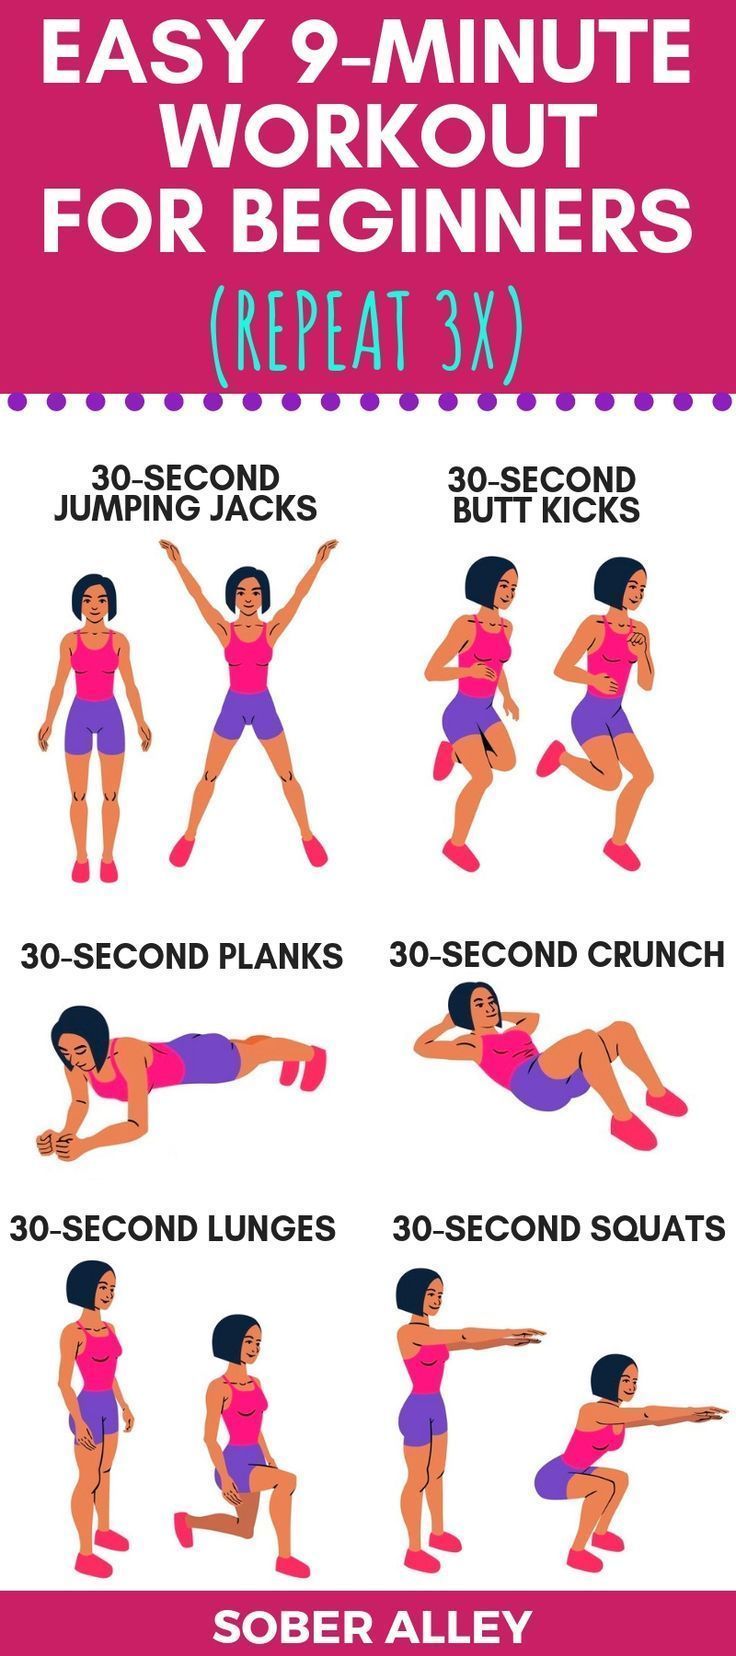 Super Simple 9-Minute Fat Burning Workout For Beginners -   18 fitness Tips training ideas